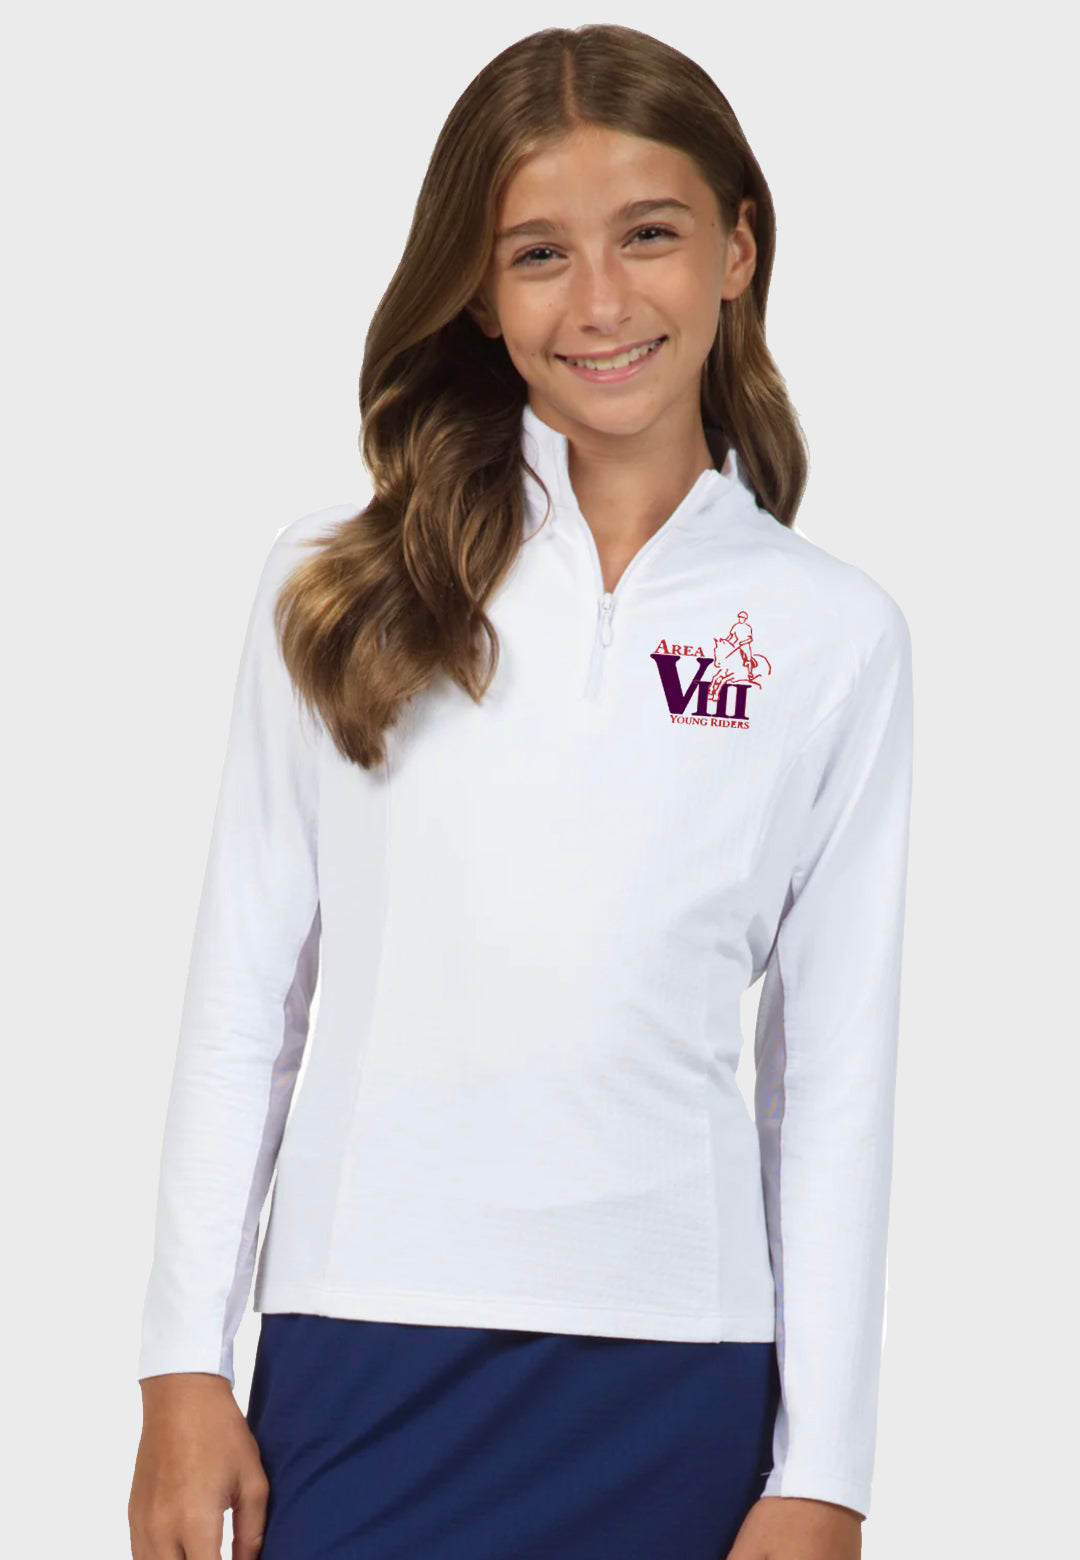 Area 8 Young Riders IBKÜL's Girls Long Sleeve Zip Mock Neck - 2 Color Options